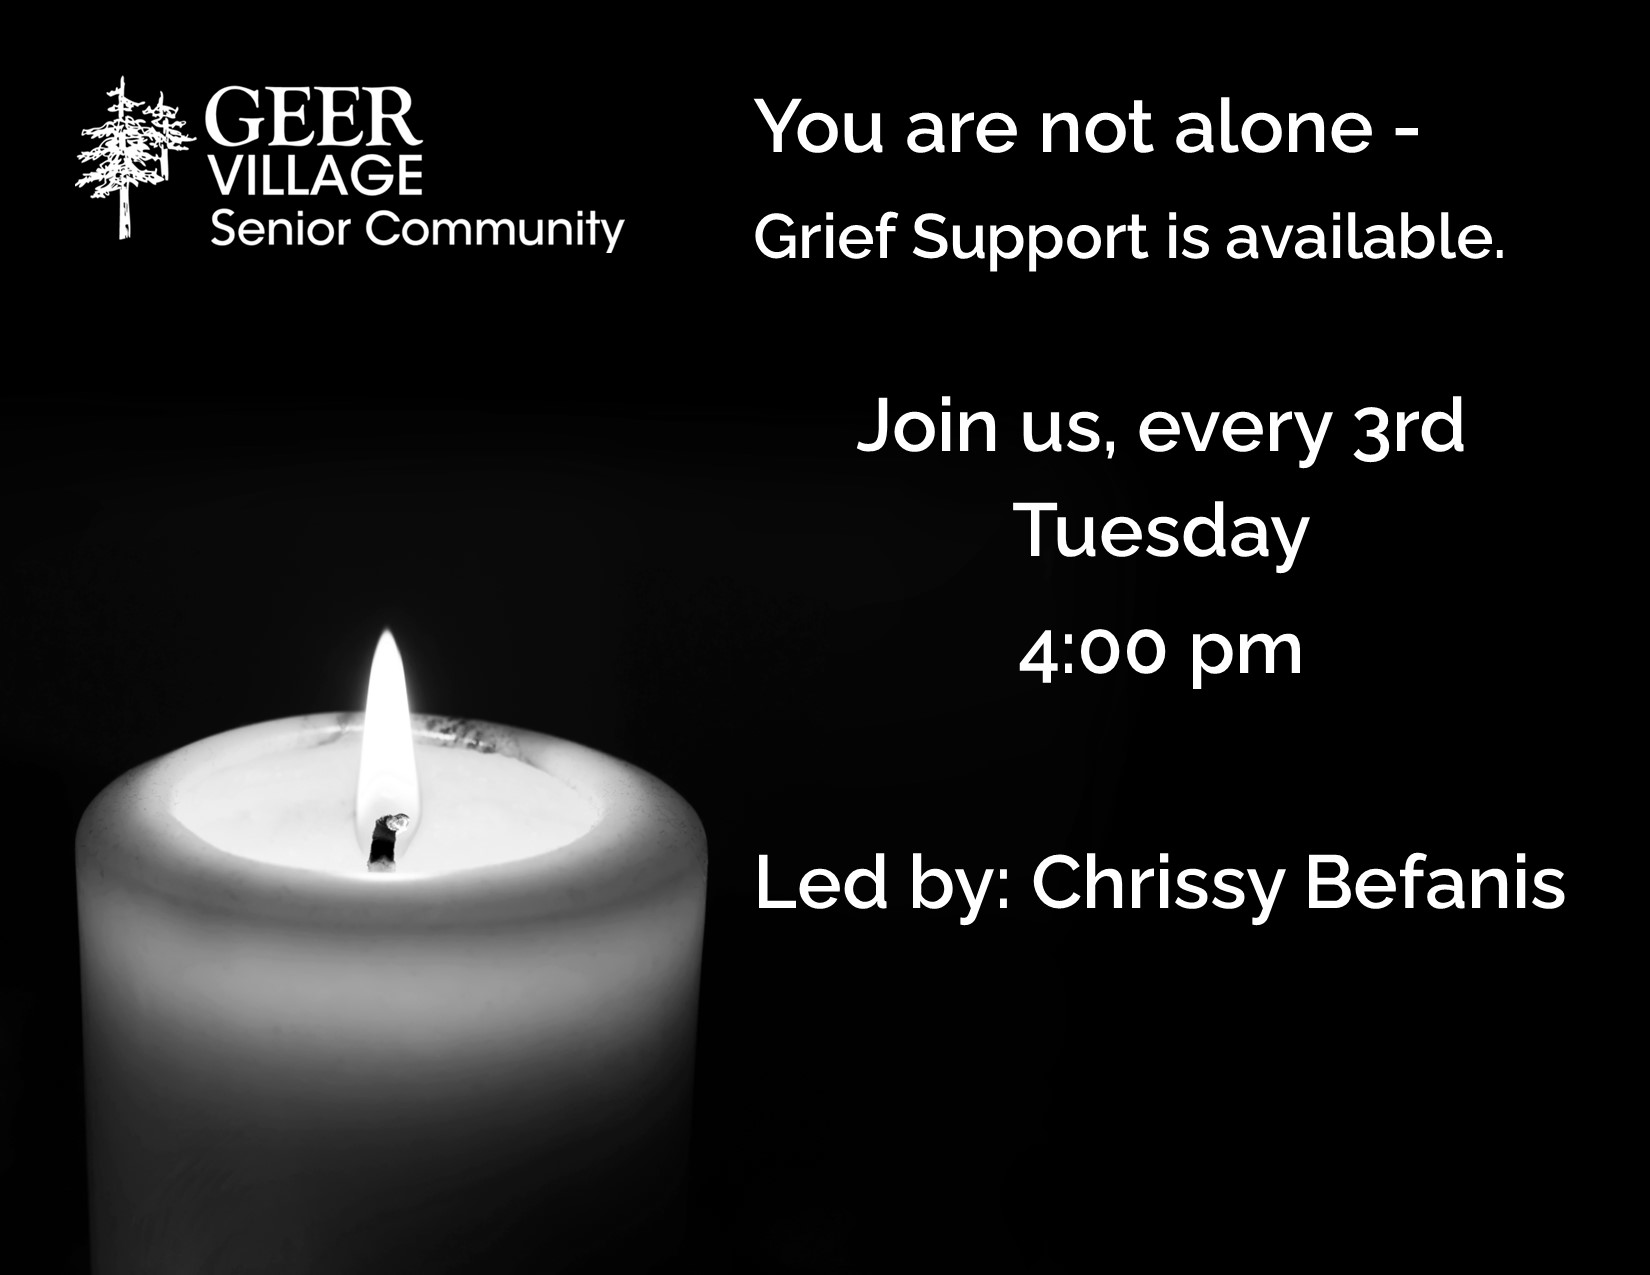 grief support group